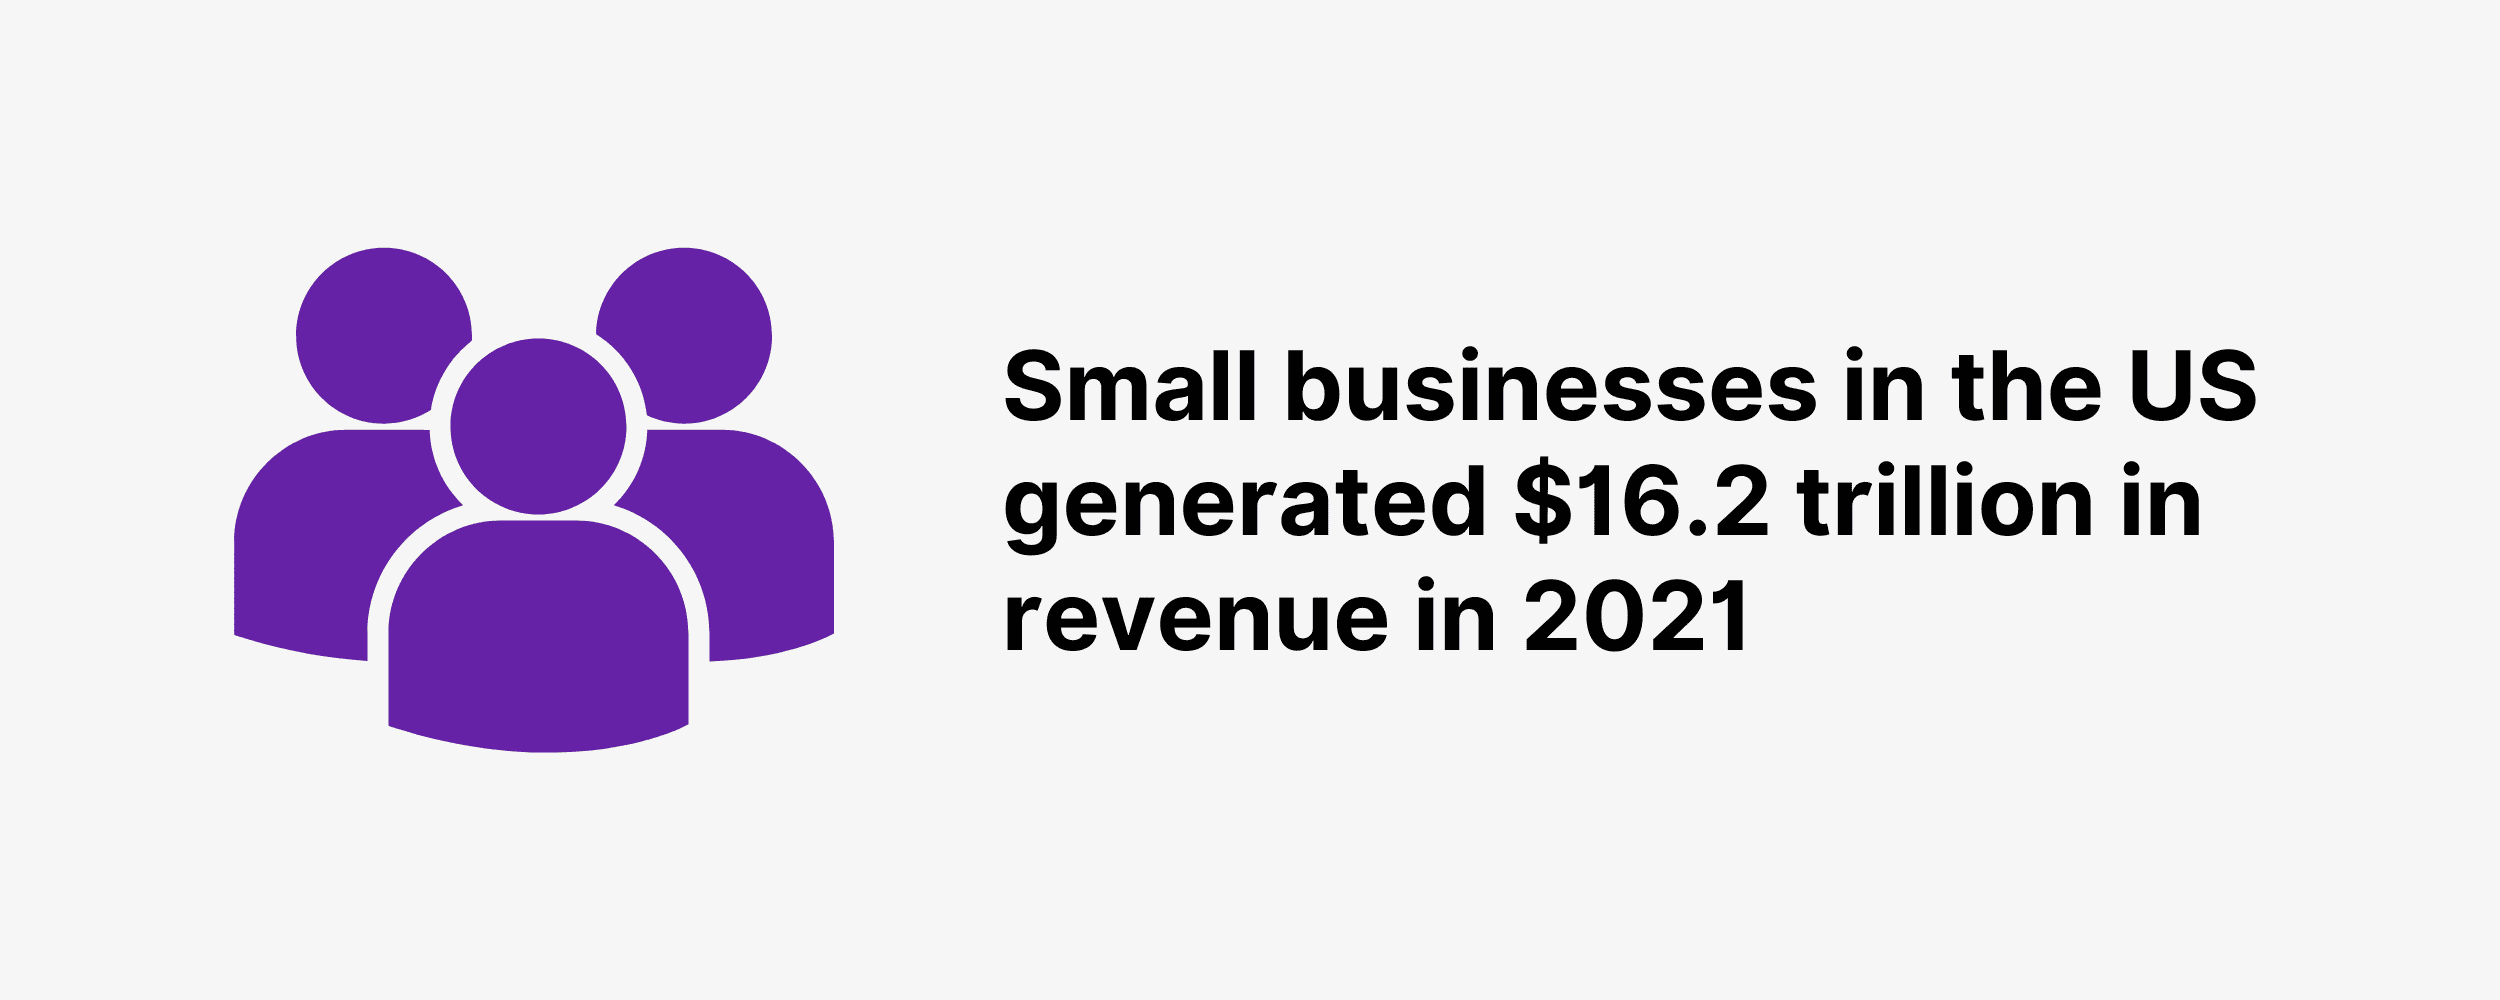 Small businesses in the US generated $16.2 trillion in revenue in 2021